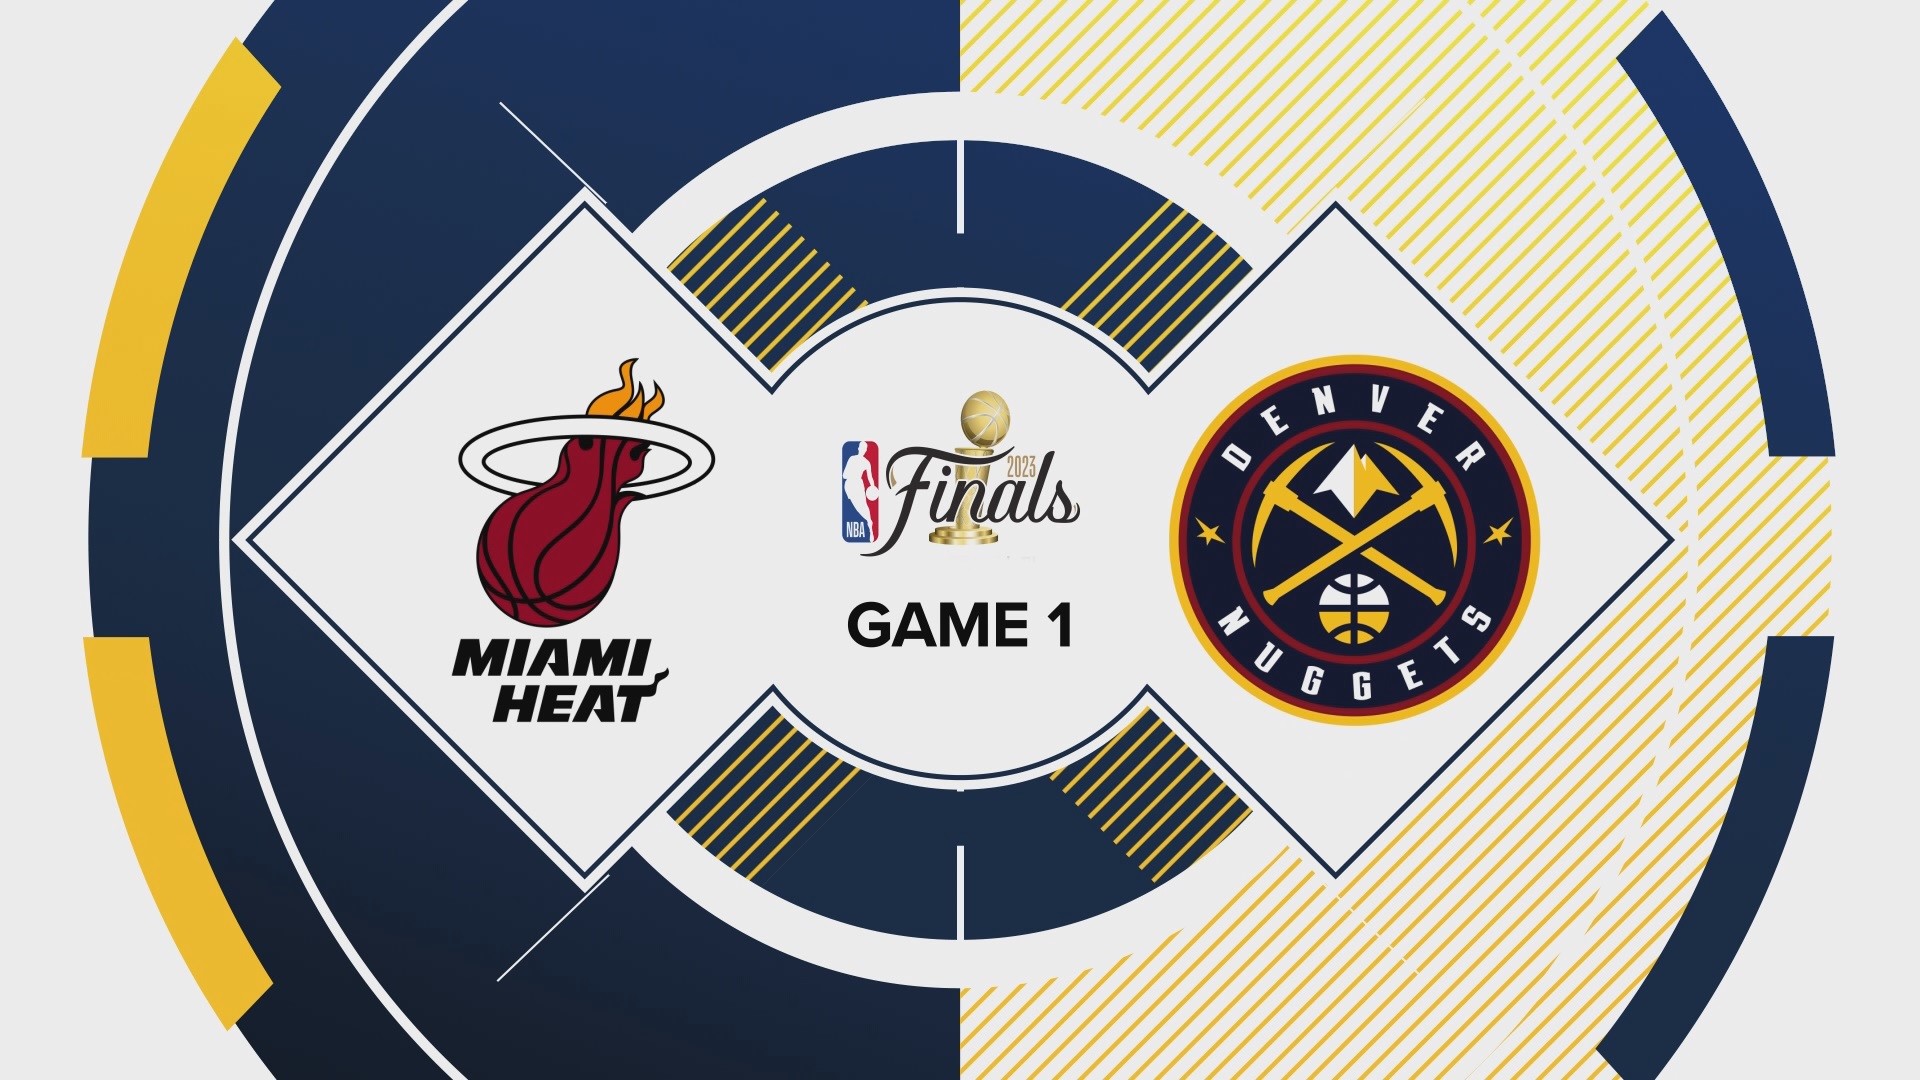 Game 1 between the Denver Nuggets and Miami Heat tips off Thursday night at Ball Arena.